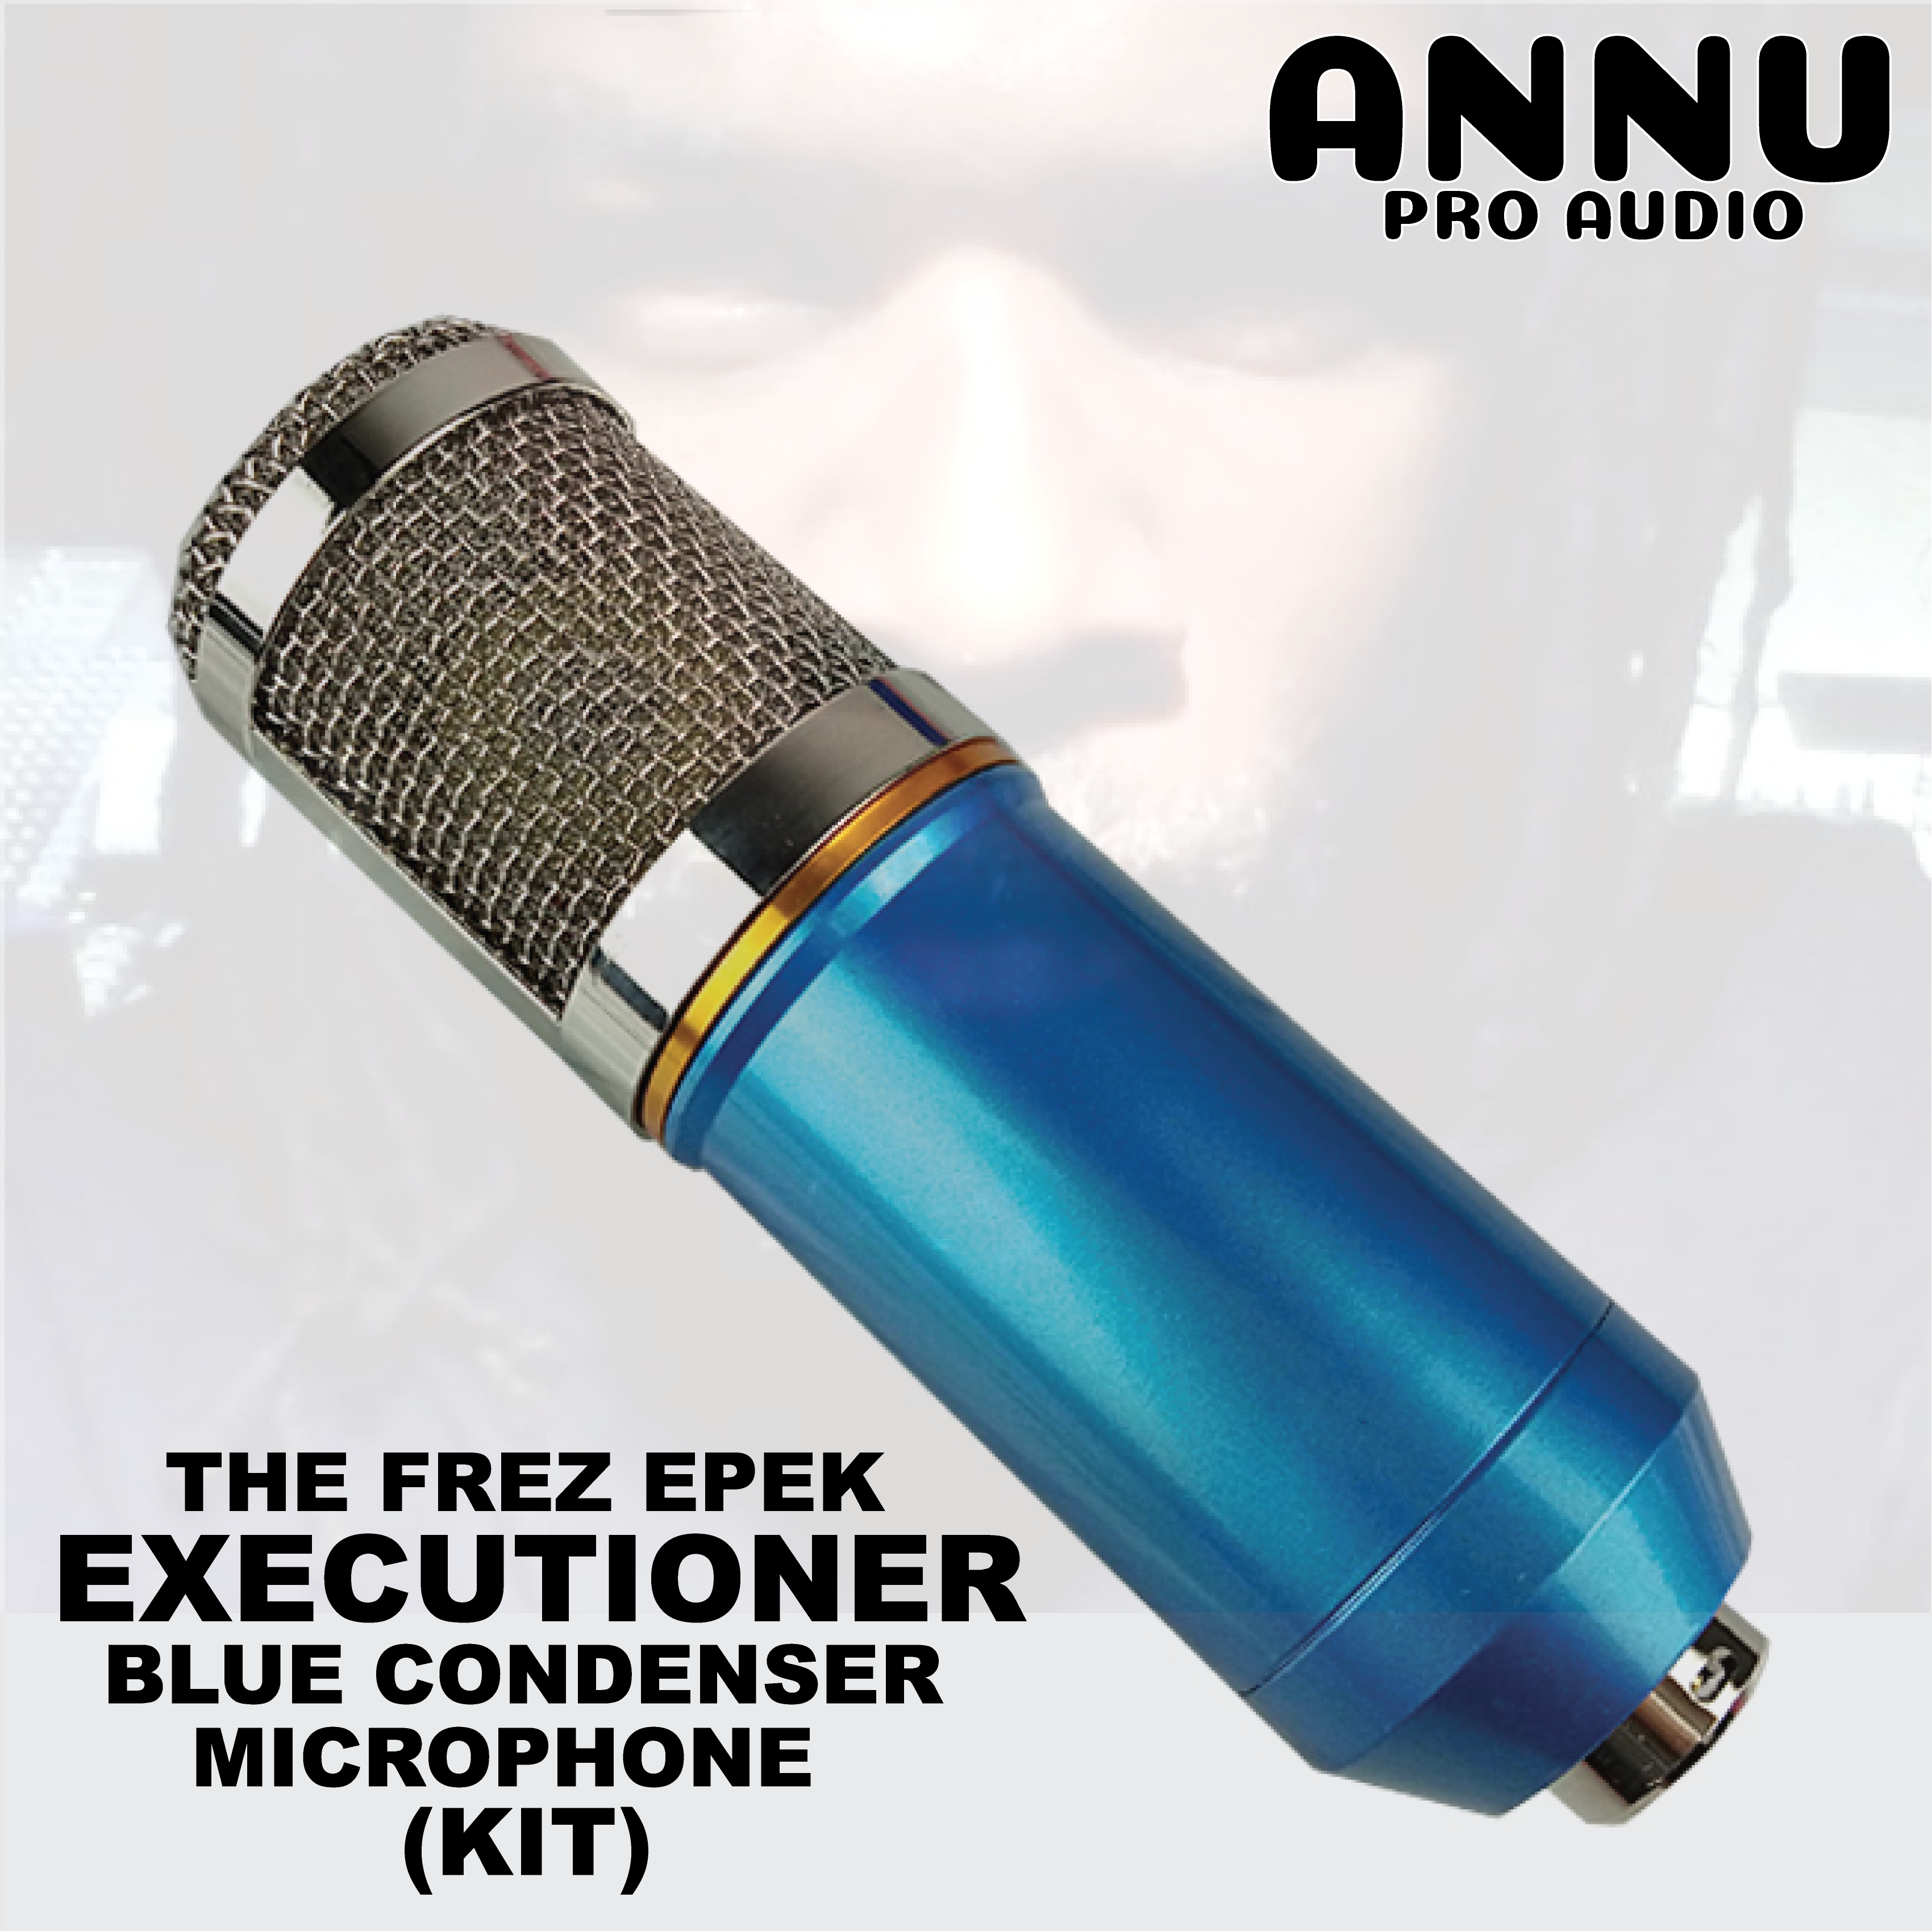 ANNU PRO AUDIO - THE FREZ EPEK EXECUTIONER BLUE CONDENSER MICROPHONE KIT